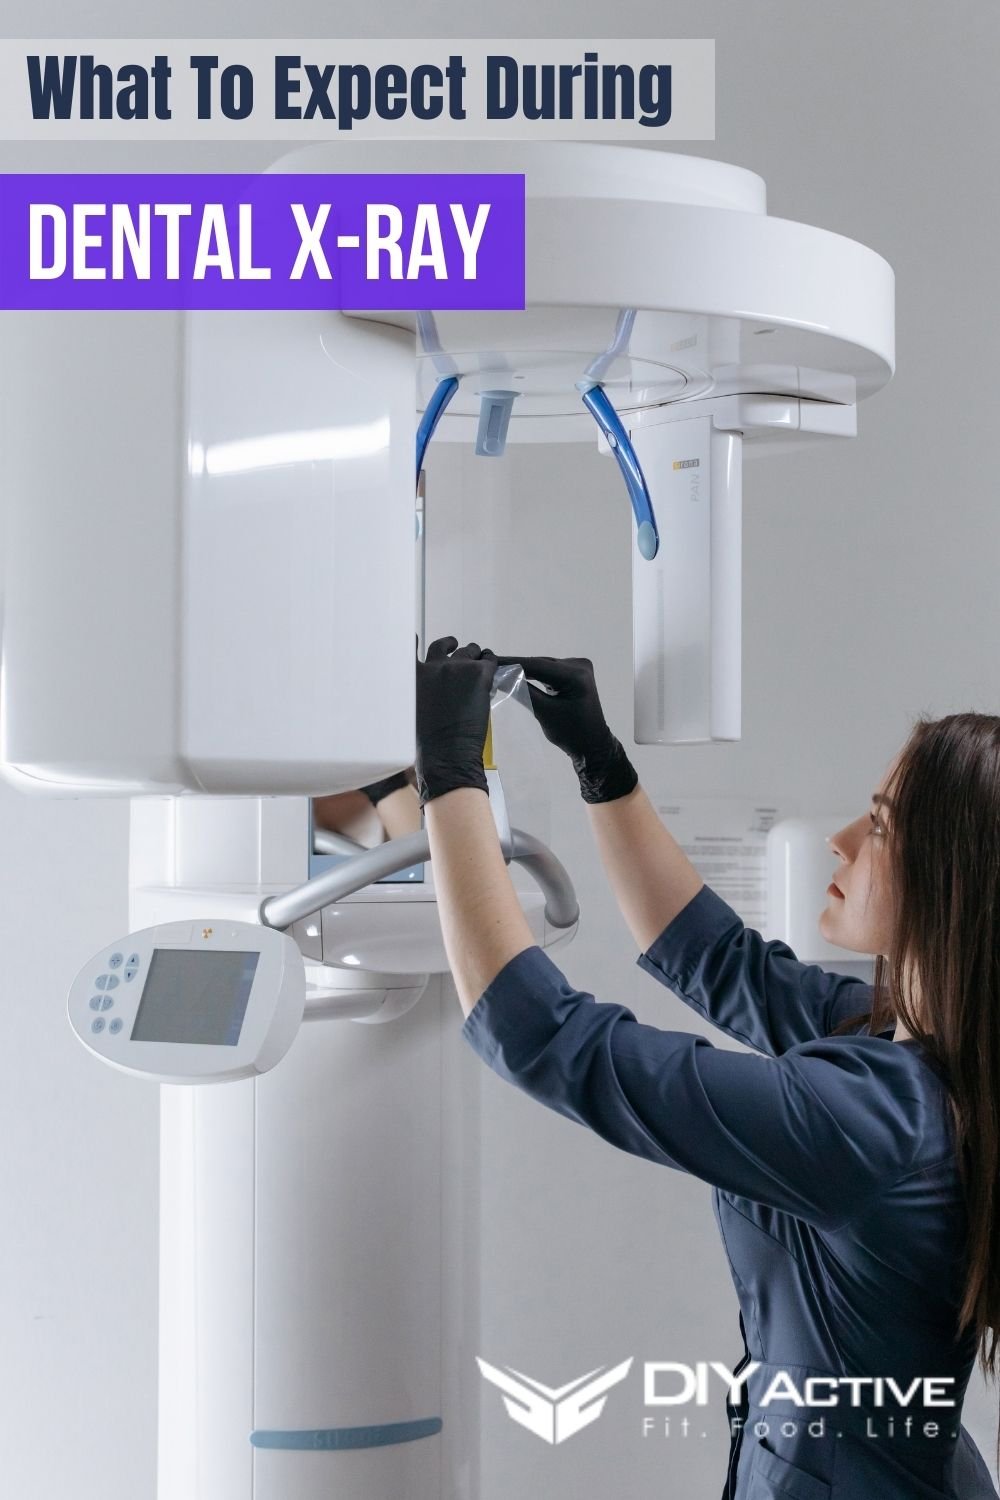 What To Expect During A Dental X-Ray 2